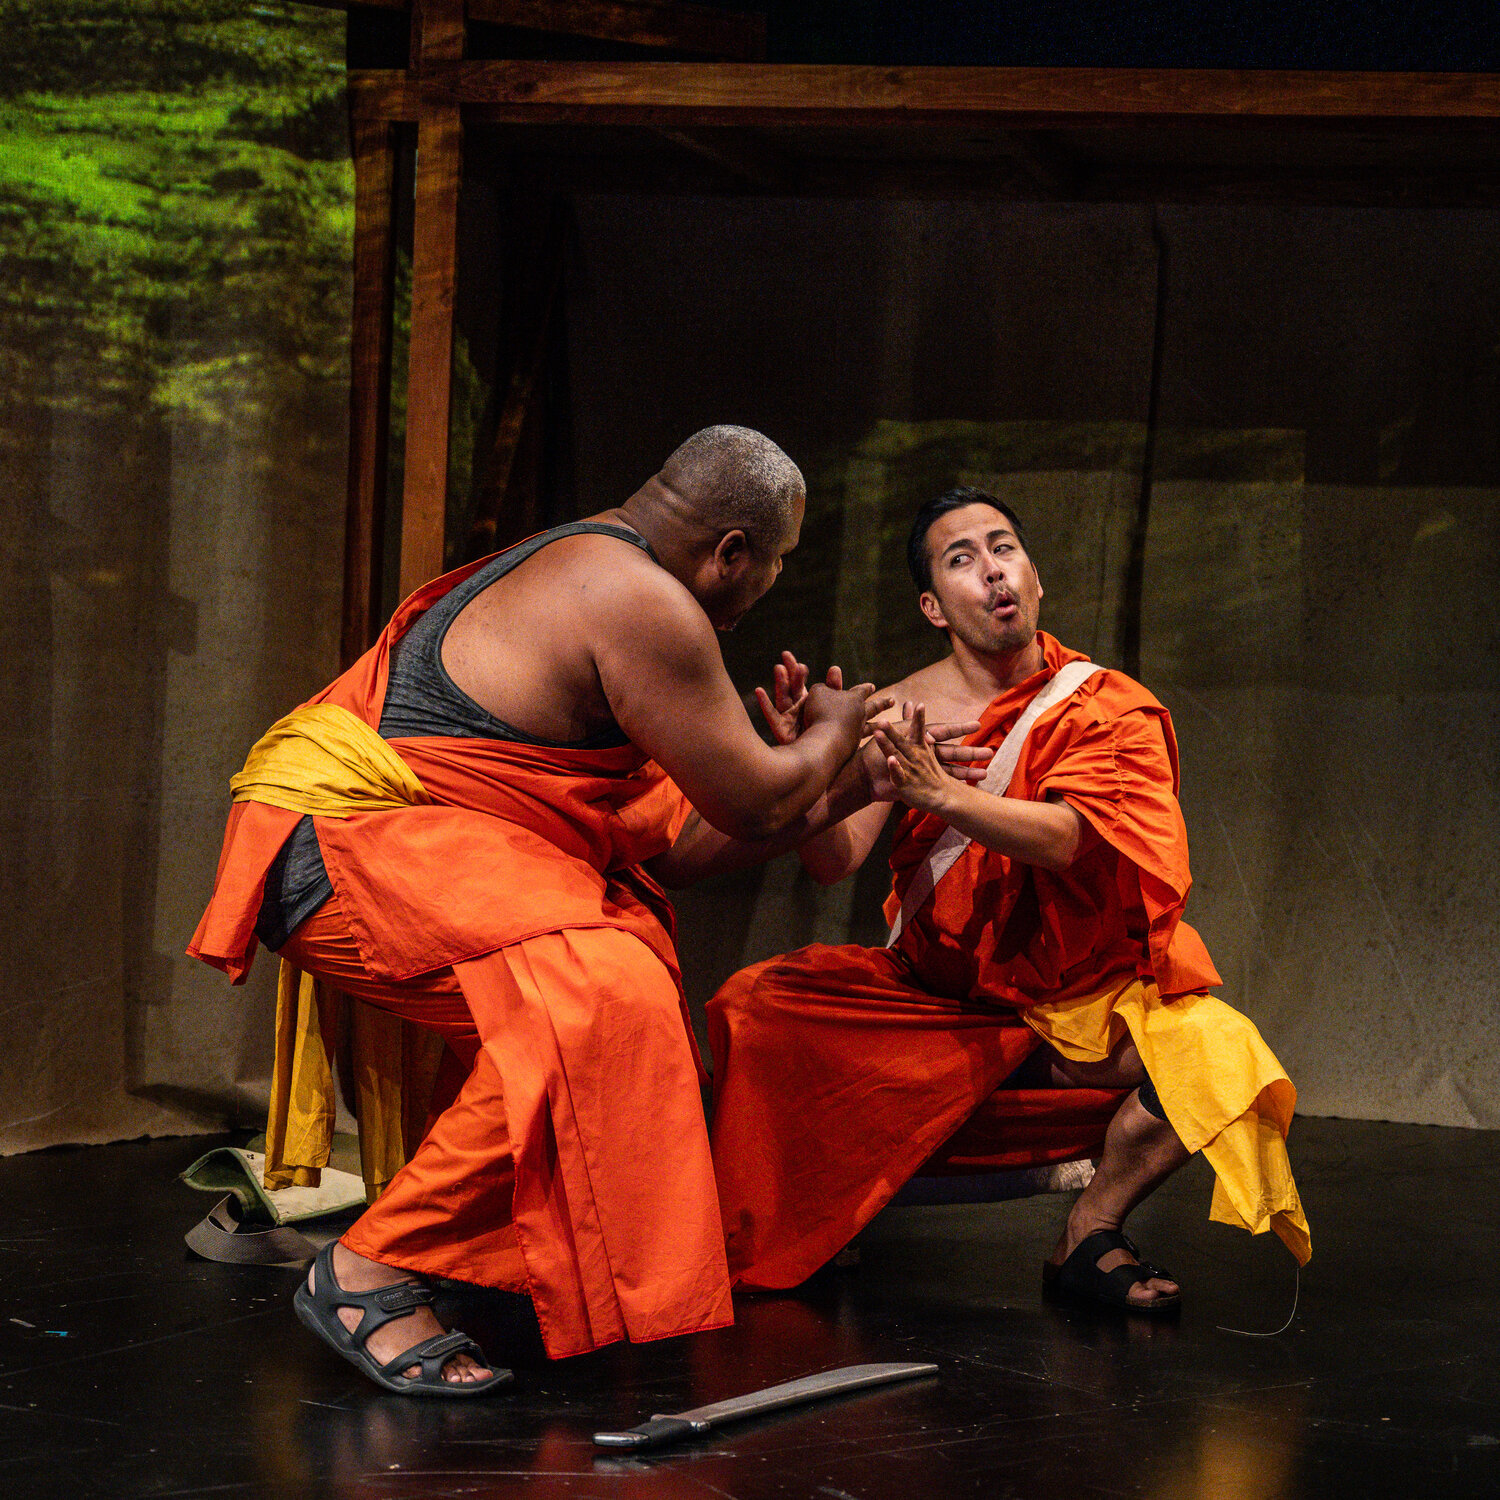 Payton J. Woodson (left) and  Norm Muñoz (right) perform in the “Kung Fu Zombies Saga: Shaman Warrior & Cannibals” at the Luminary Arts Center.